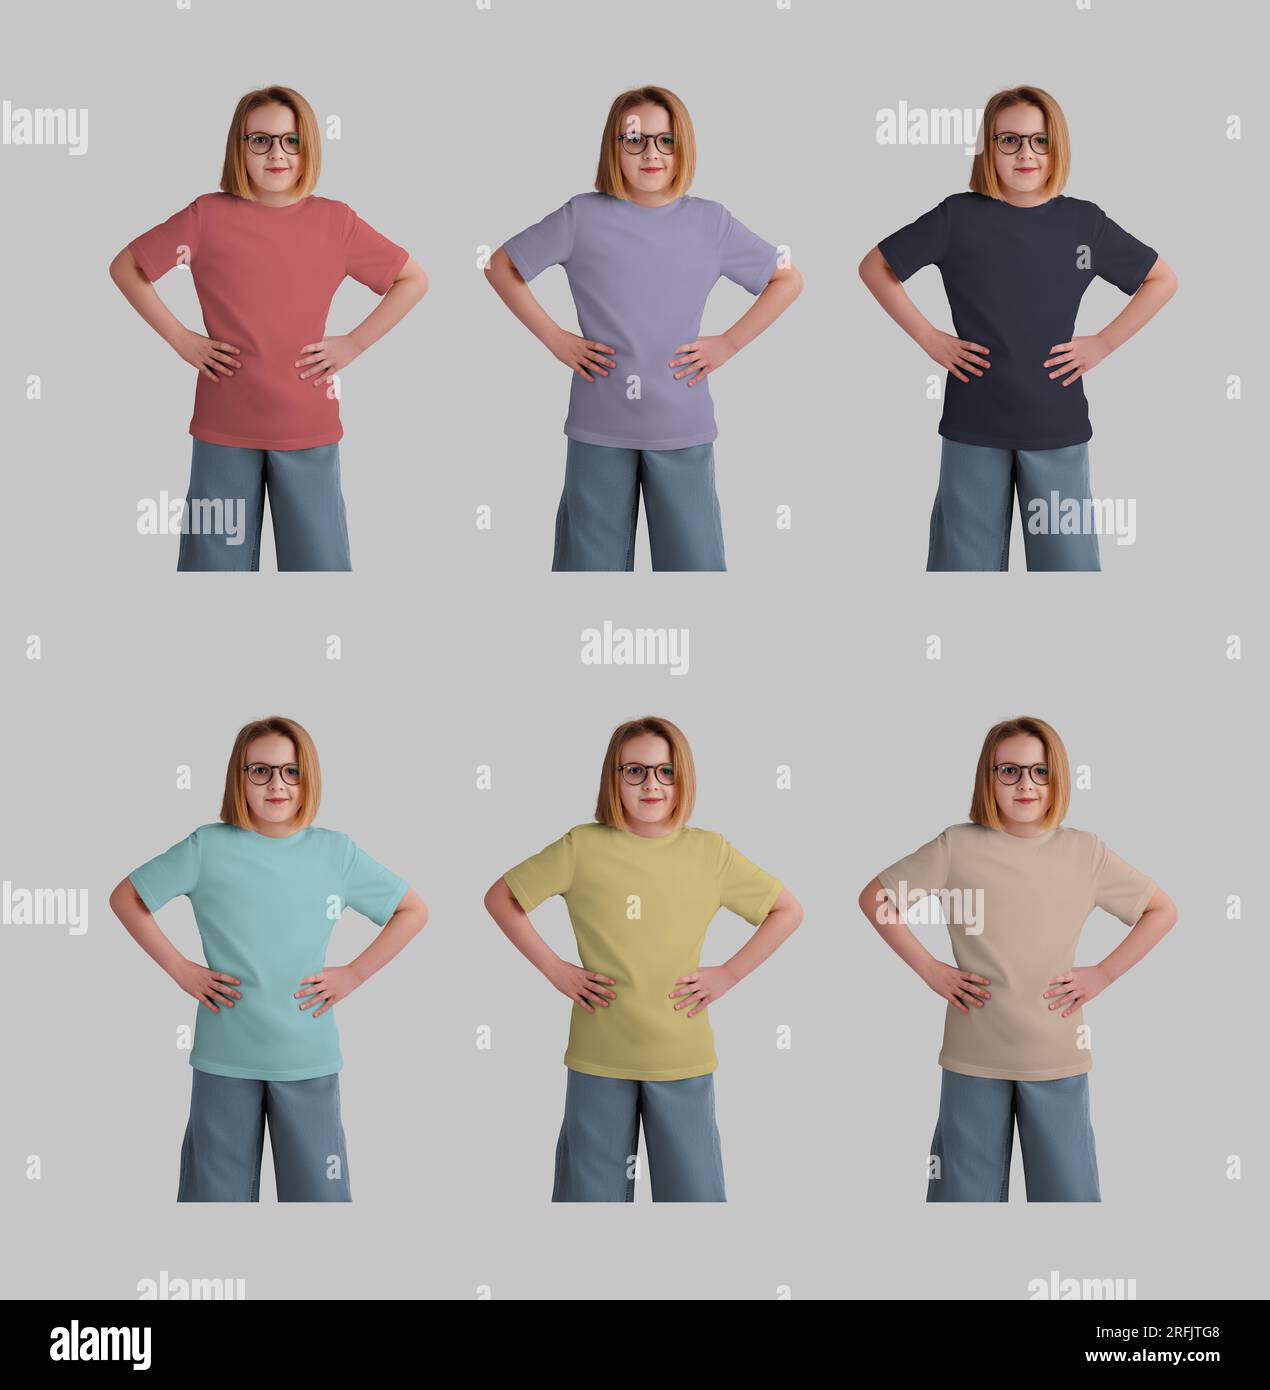 Mockup of colorful t-shirts on a girl in glasses, front view, isolated on the background. Template cotton apparel for a child. A set of kid's shirts, Stock Photo